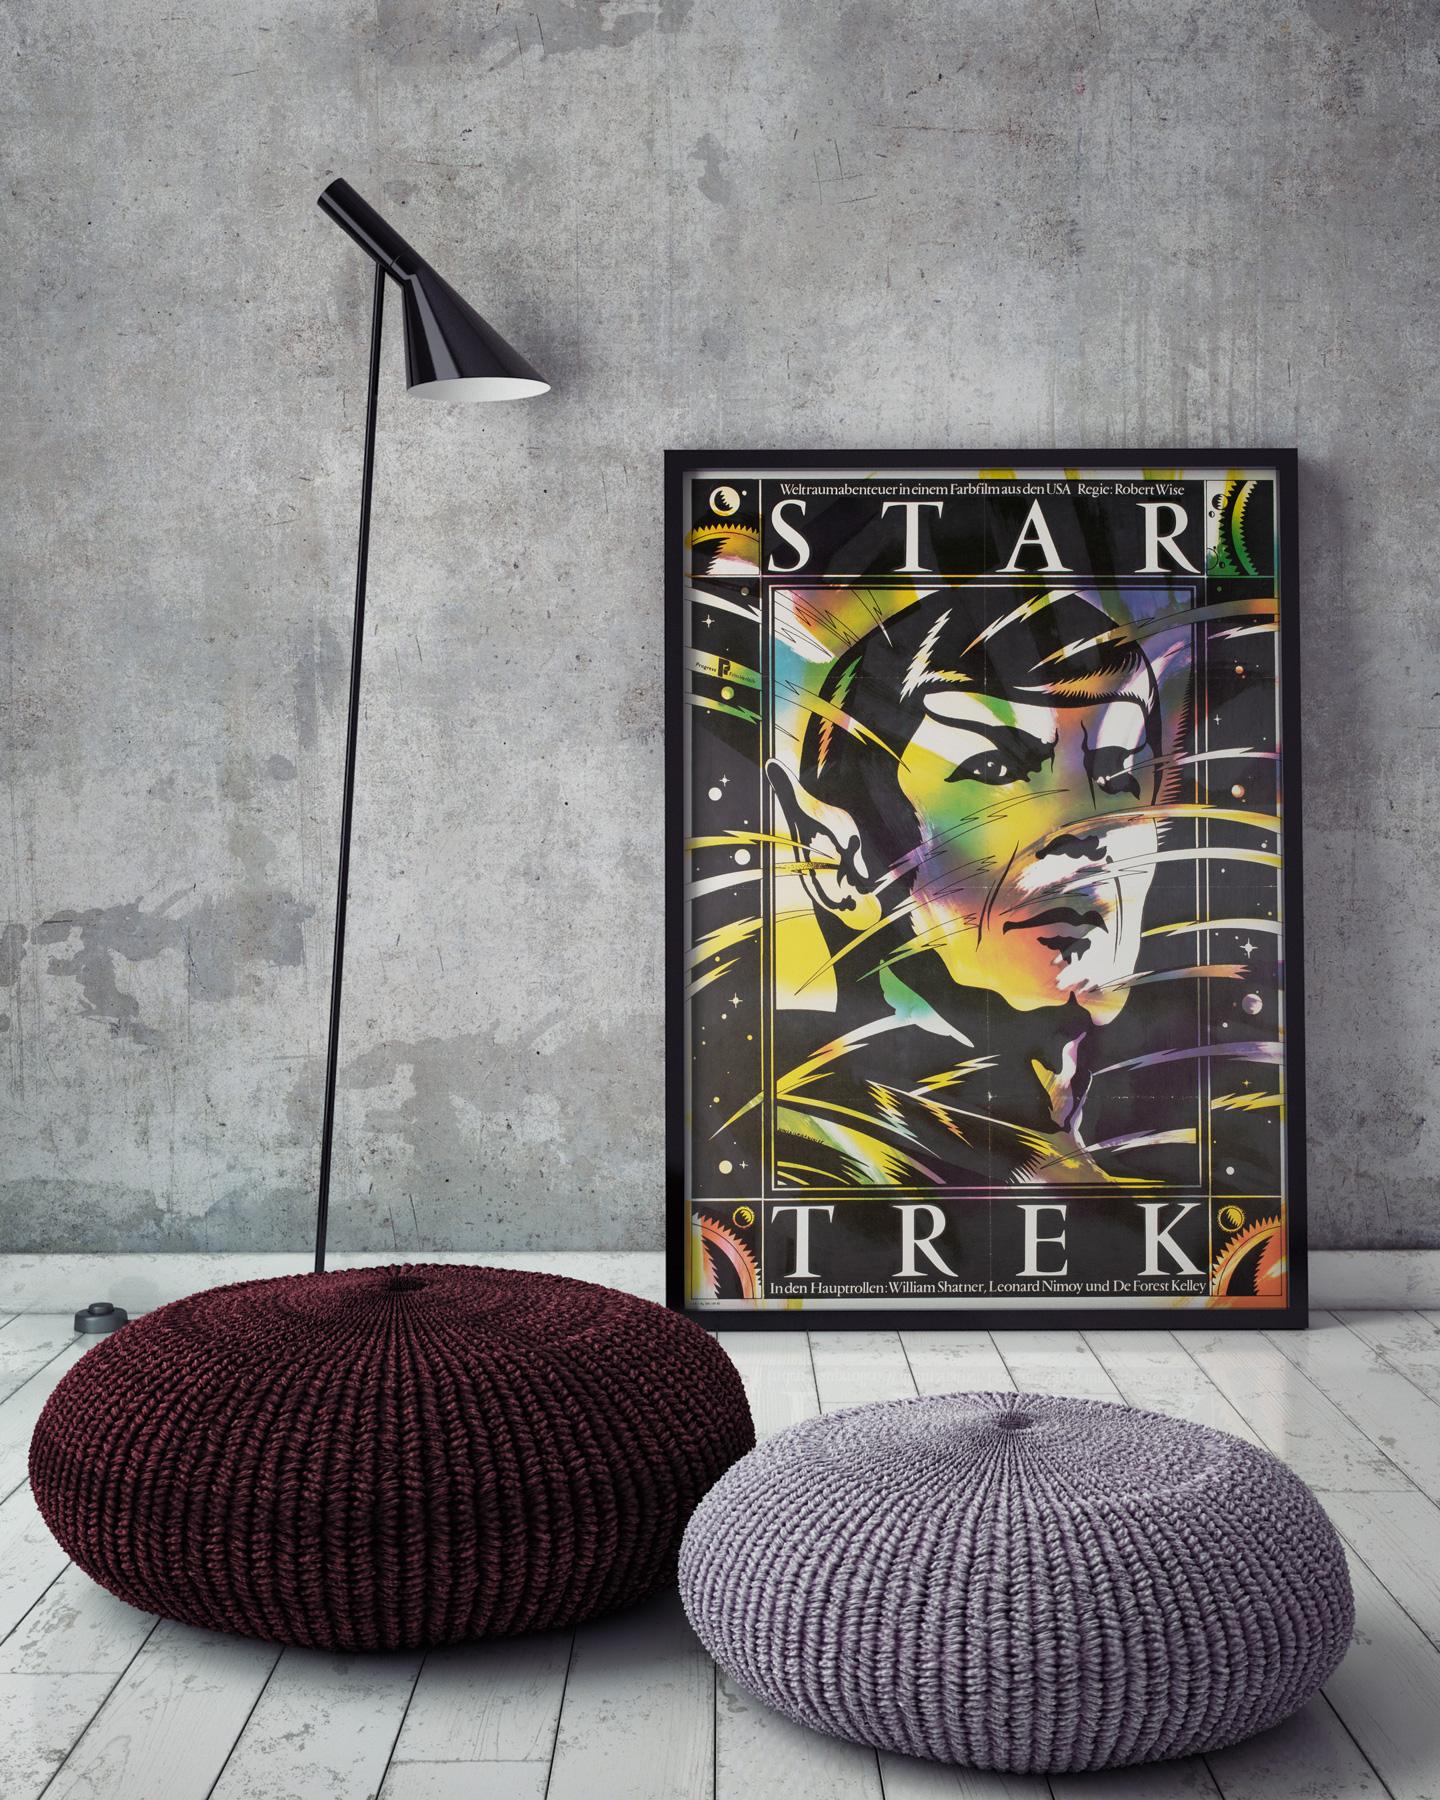 We love Ilabowski's Spock artwork on the East German film poster for Star Trek. A great, rare item especially in this larger size and in rolled condition! 

This original vintage movie poster has been professionally linen-backed and is sized 23 x 31